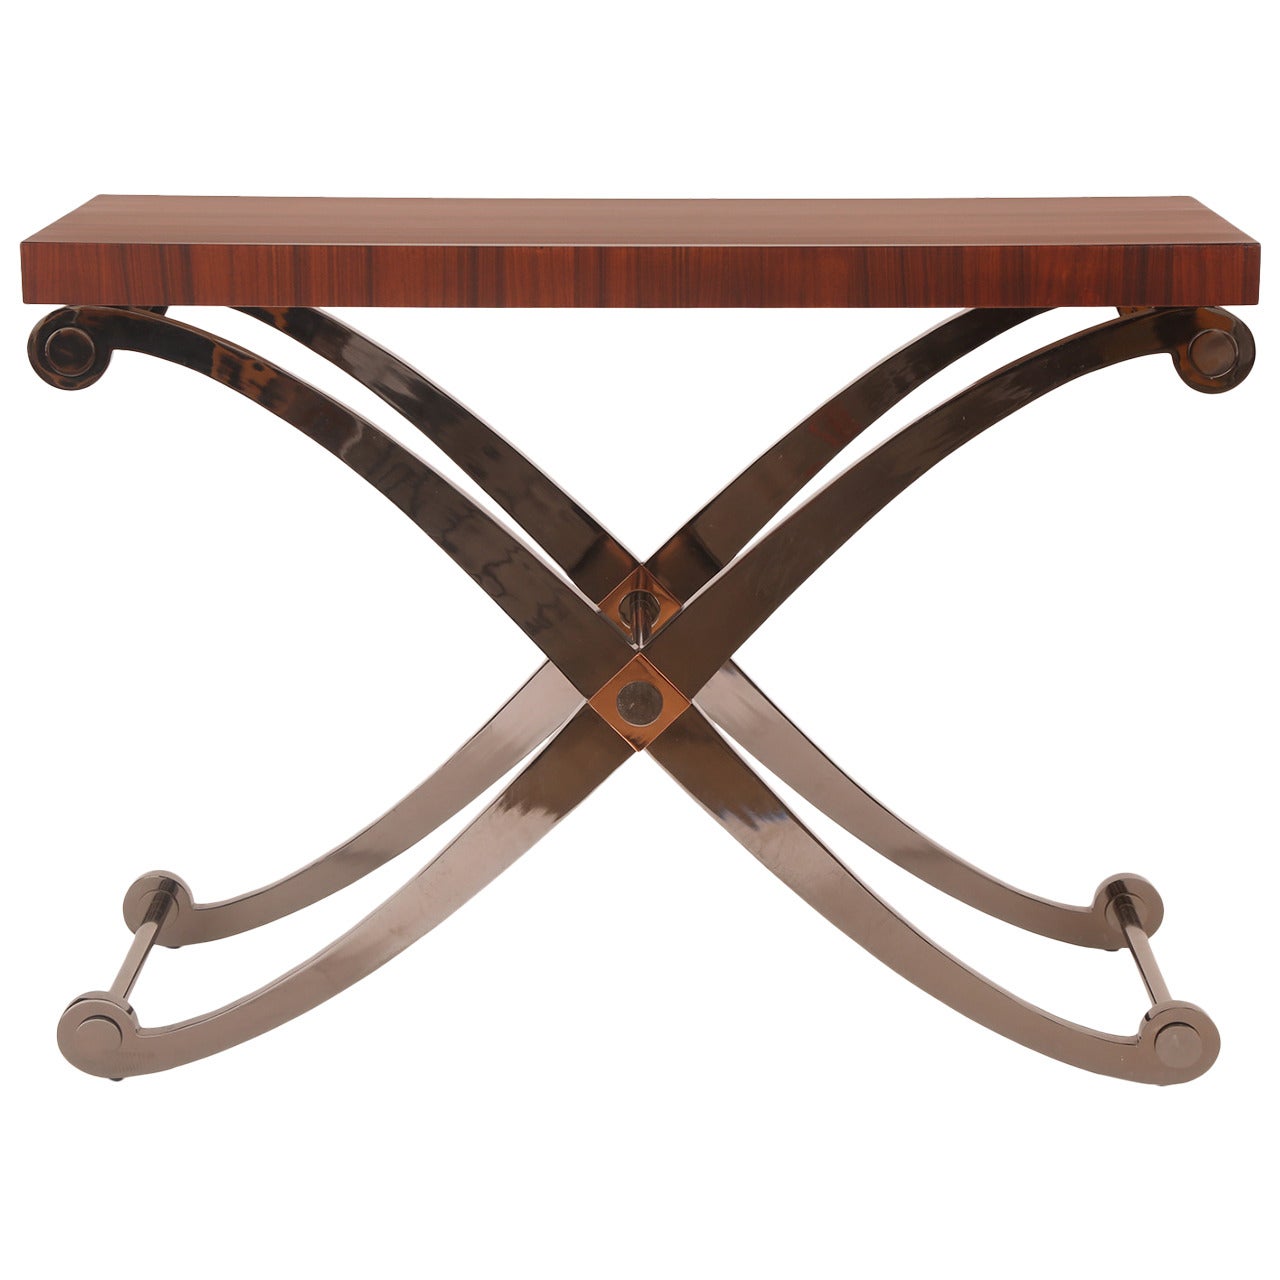 Fabulous Steel Copper and Walnut Console or Sofa Table